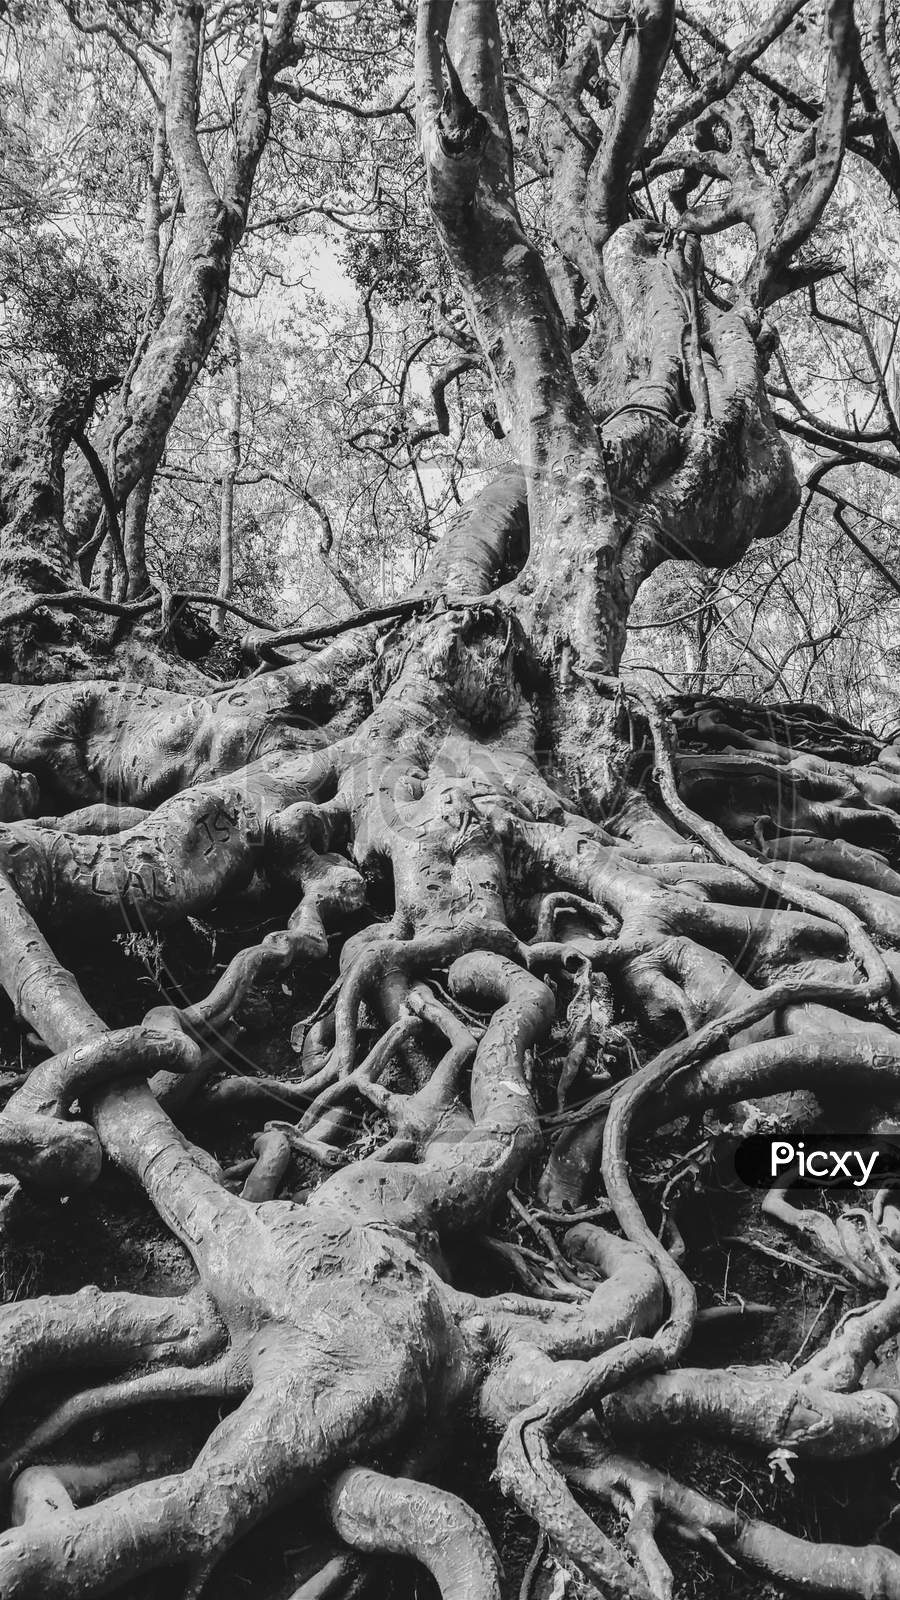 Roots of a tree